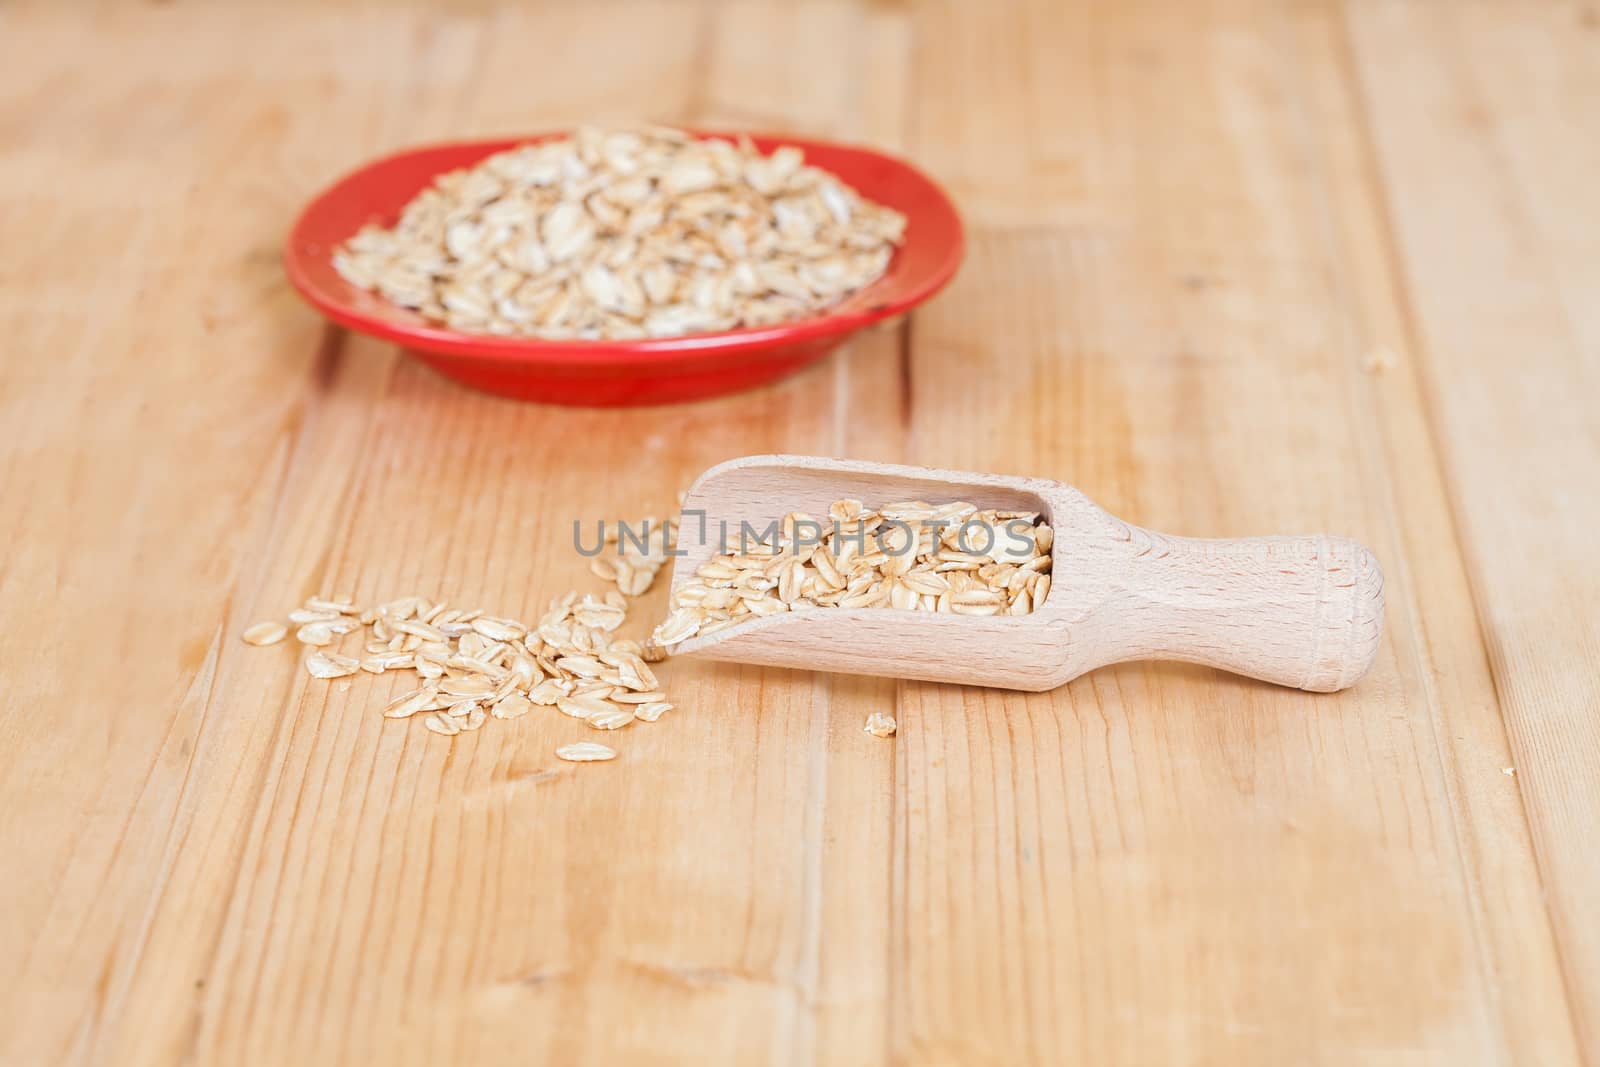 red dish and wood spoon with oats flakes pile on wood  by amnarj2006